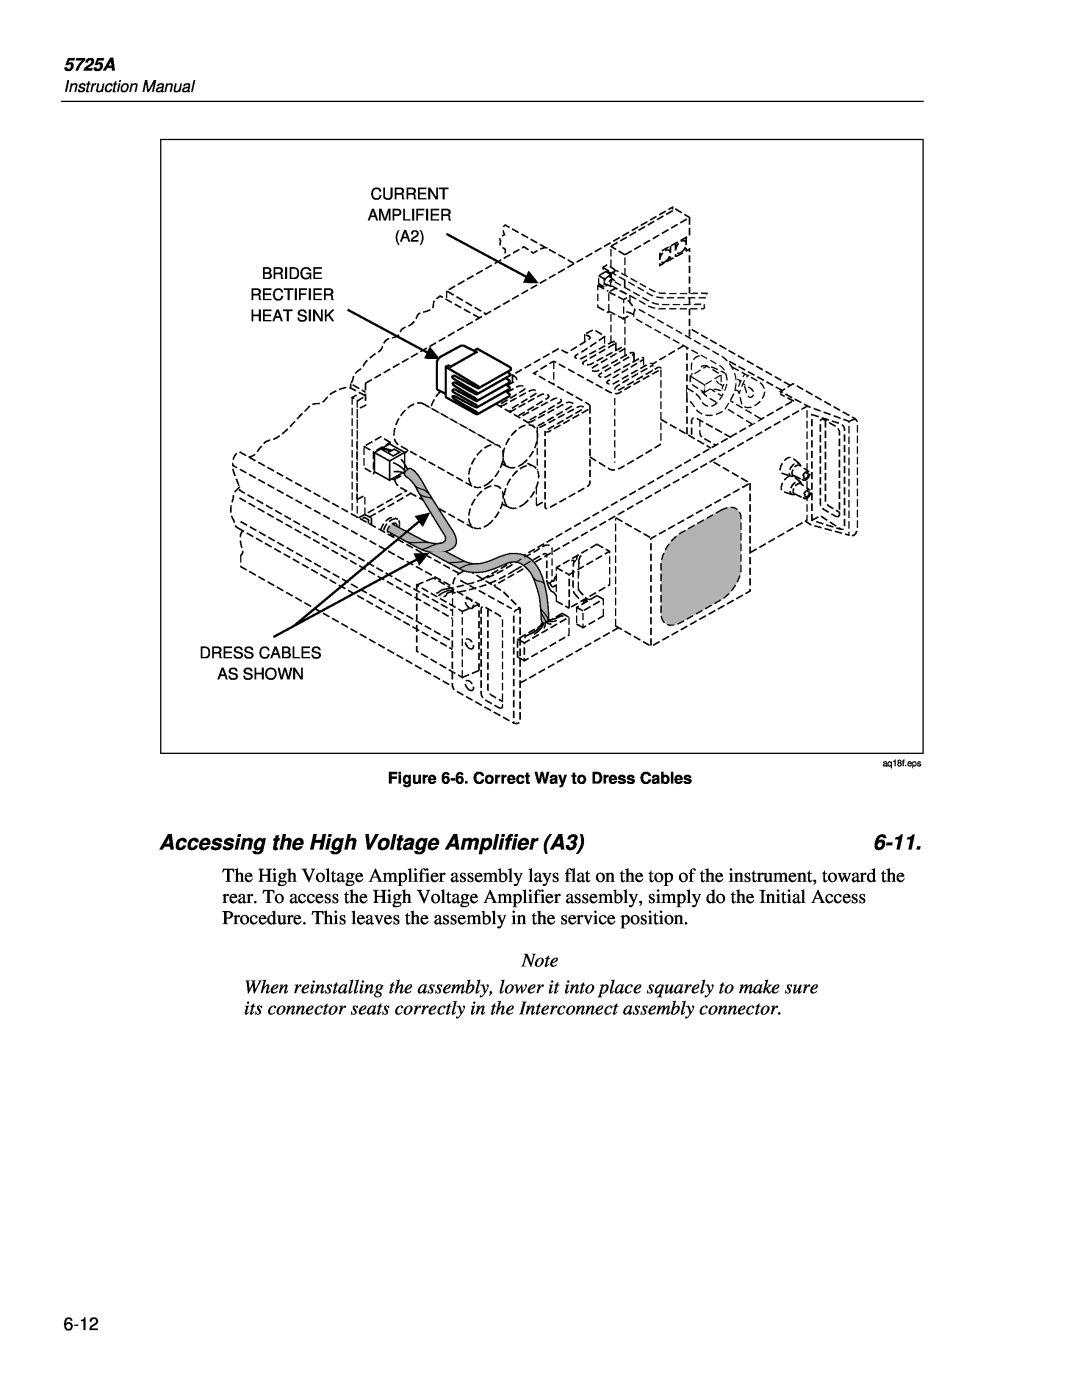 Fluke 5725A instruction manual Accessing the High Voltage Amplifier A3, 6-11, 6.Correct Way to Dress Cables 